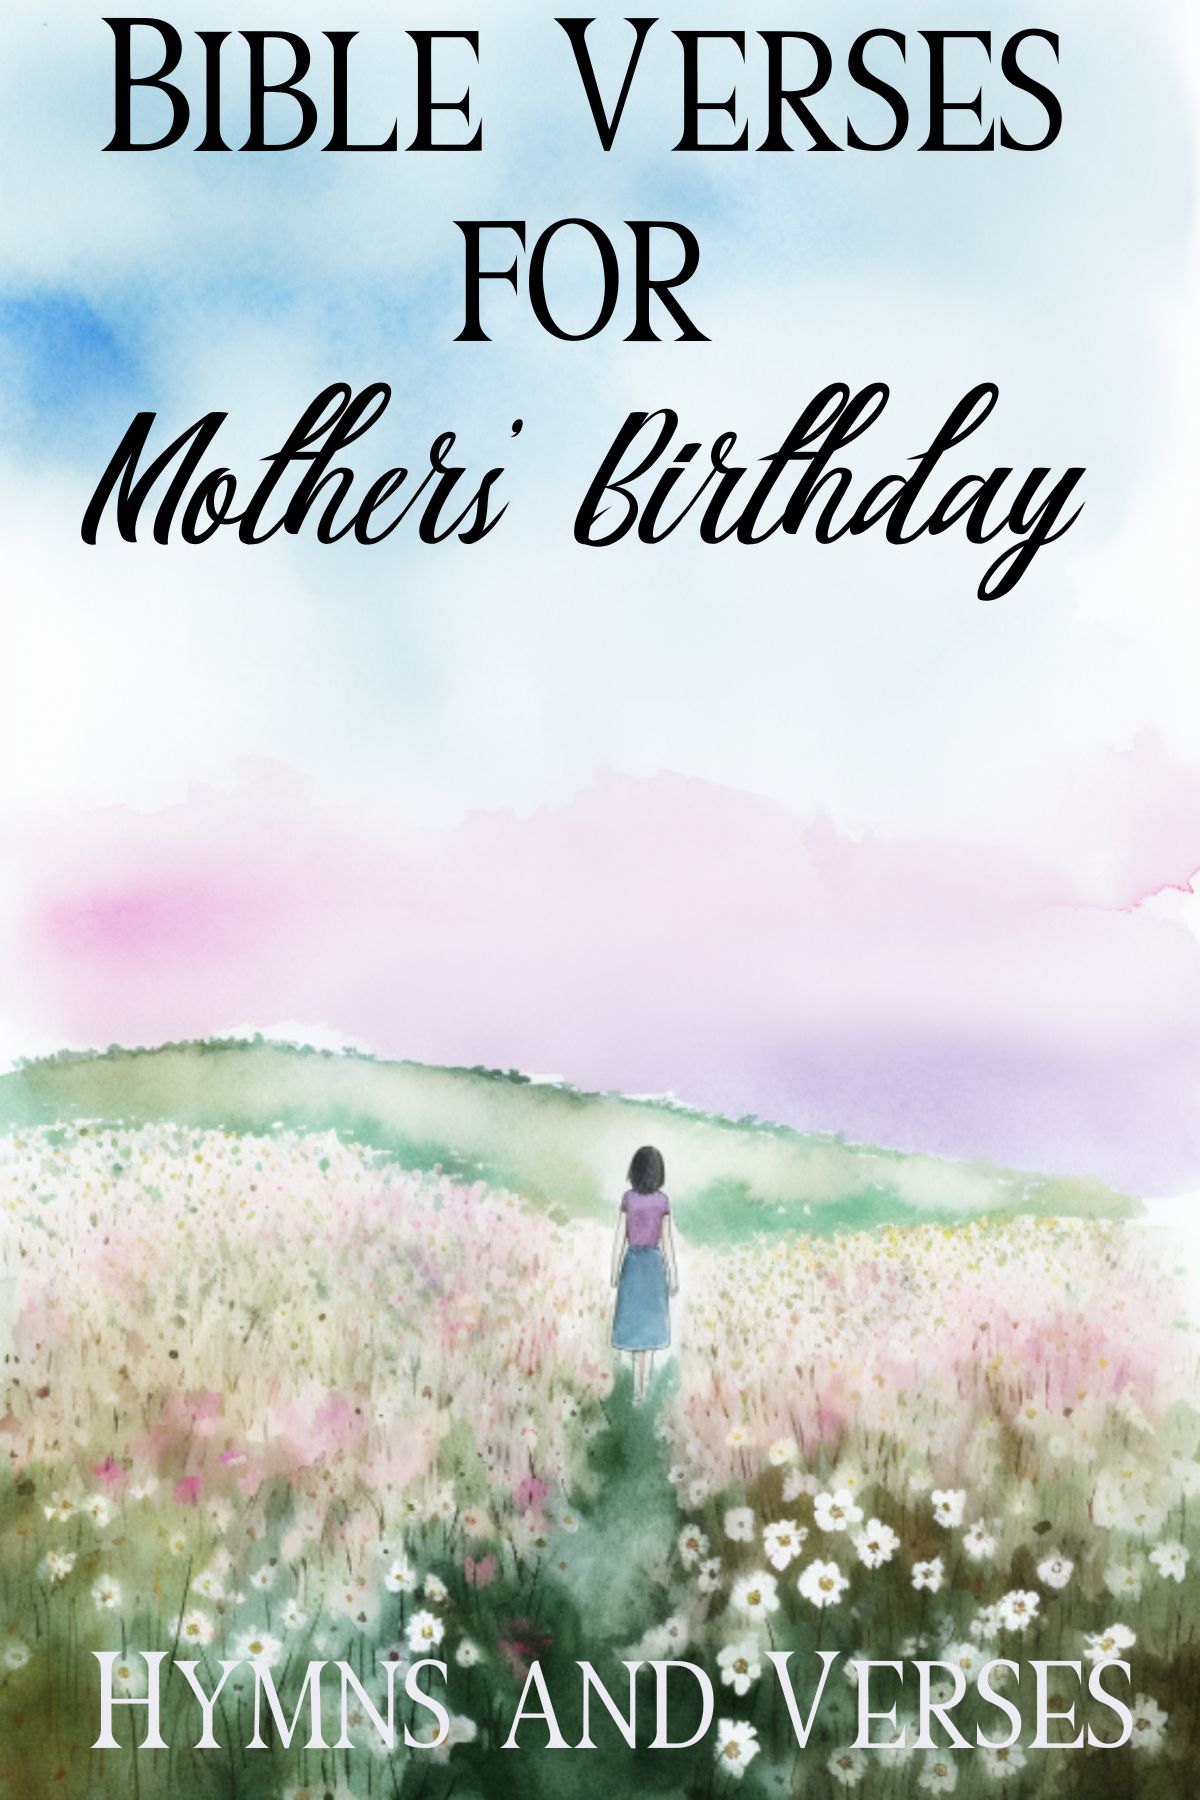 bible verses for mothers birthday pinterest pin